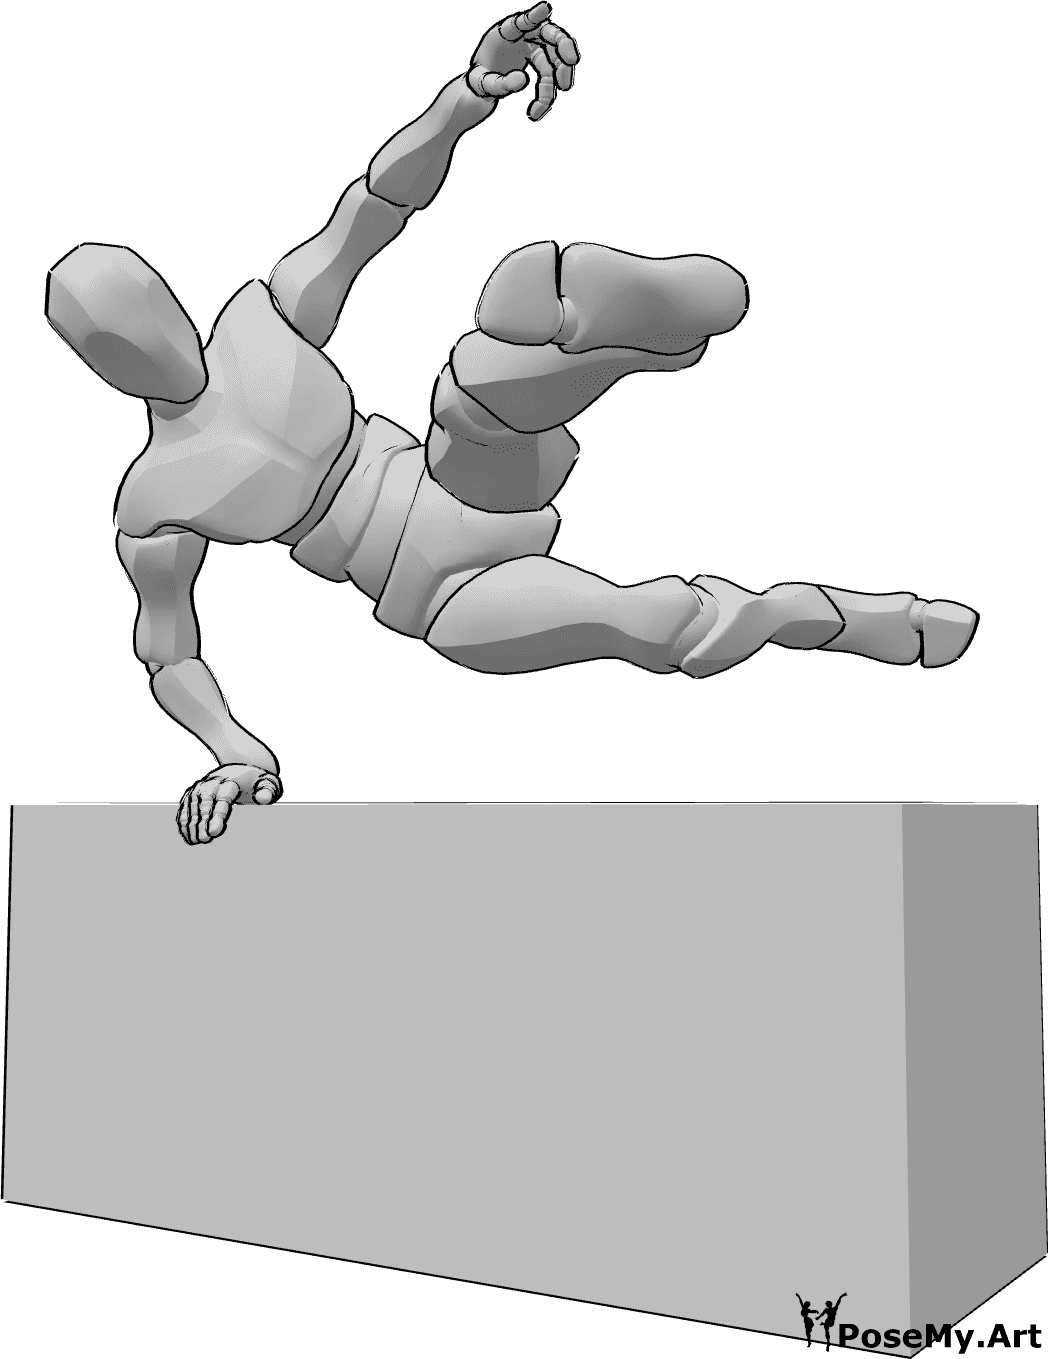 Pose Reference - Parkour jumping obstacle pose - Male is jumping over an obstacle, leaning on the edge of the object with his right hand, swinging his legs high while jumping